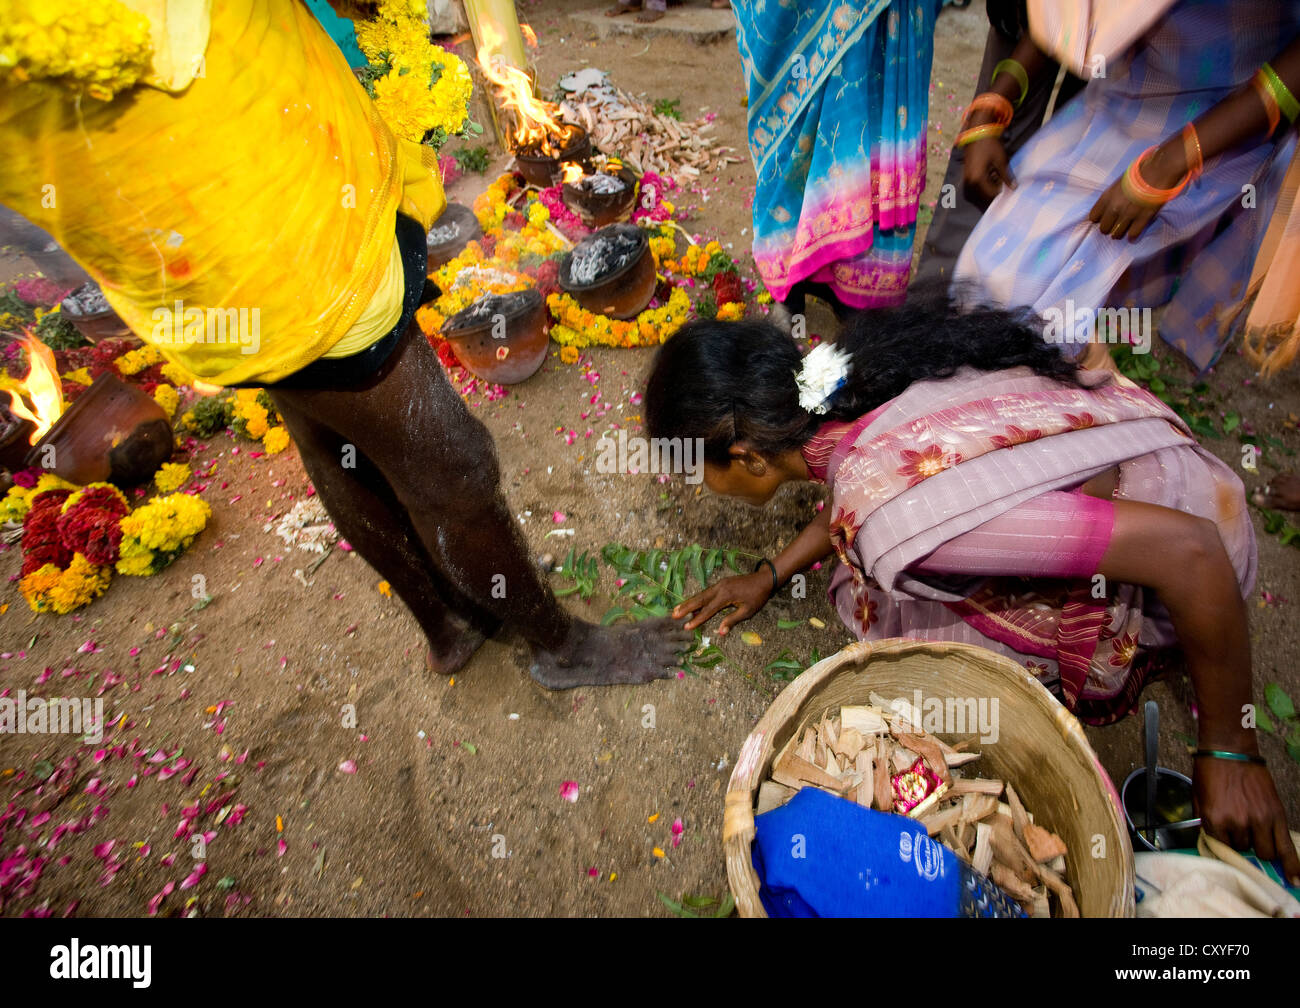 Woman Inspecting The Ashes Covered Feet Of Someone Who Succeeded At Fire Walking Ritual, Madurai, South India Stock Photo